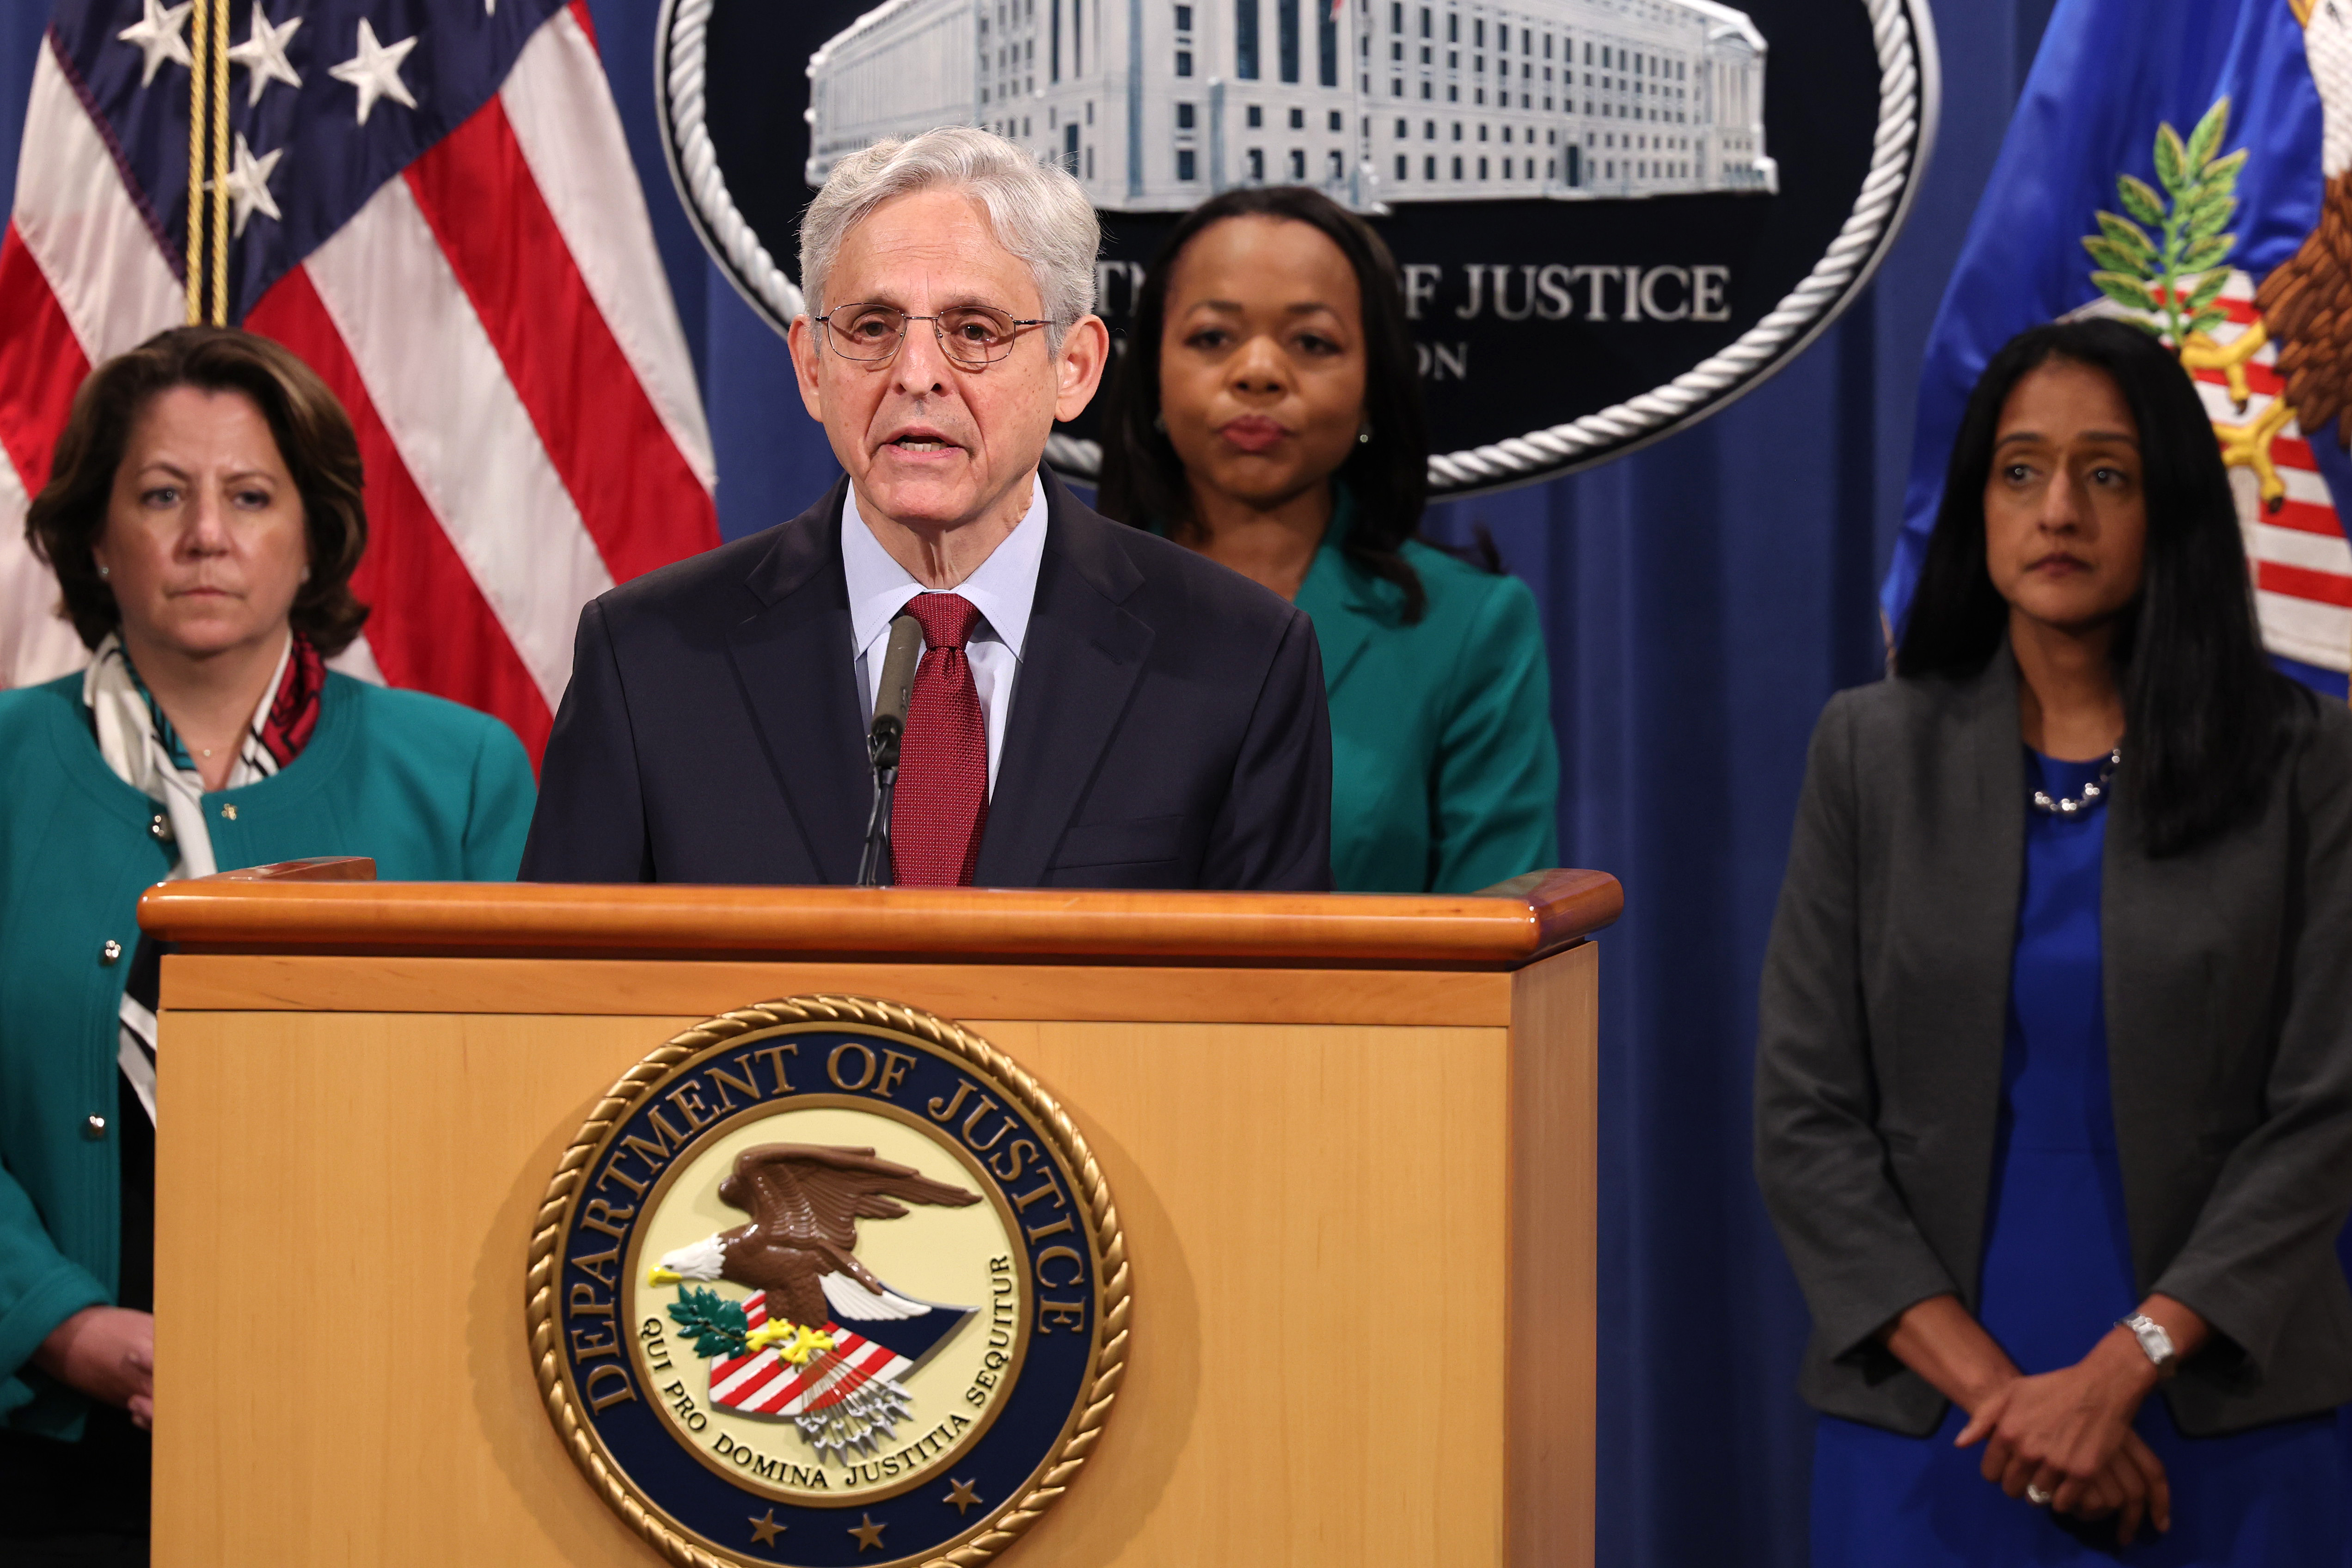 Attorney General Merrick Garland at a lectern with three people standing behind him.